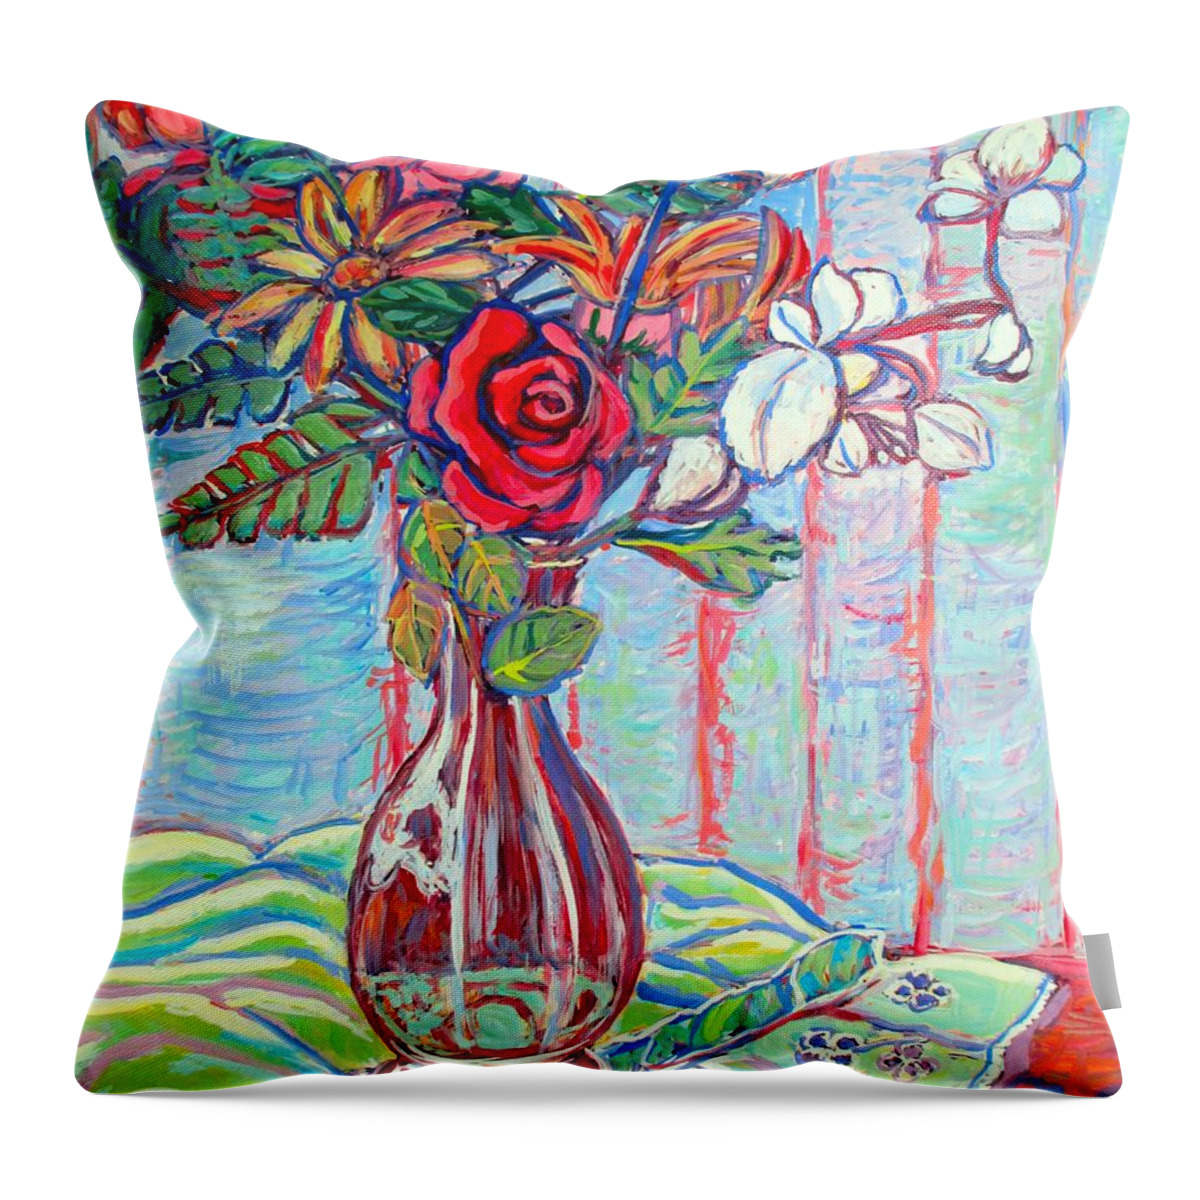 Still Life Throw Pillow featuring the painting The Red Rose by Kendall Kessler